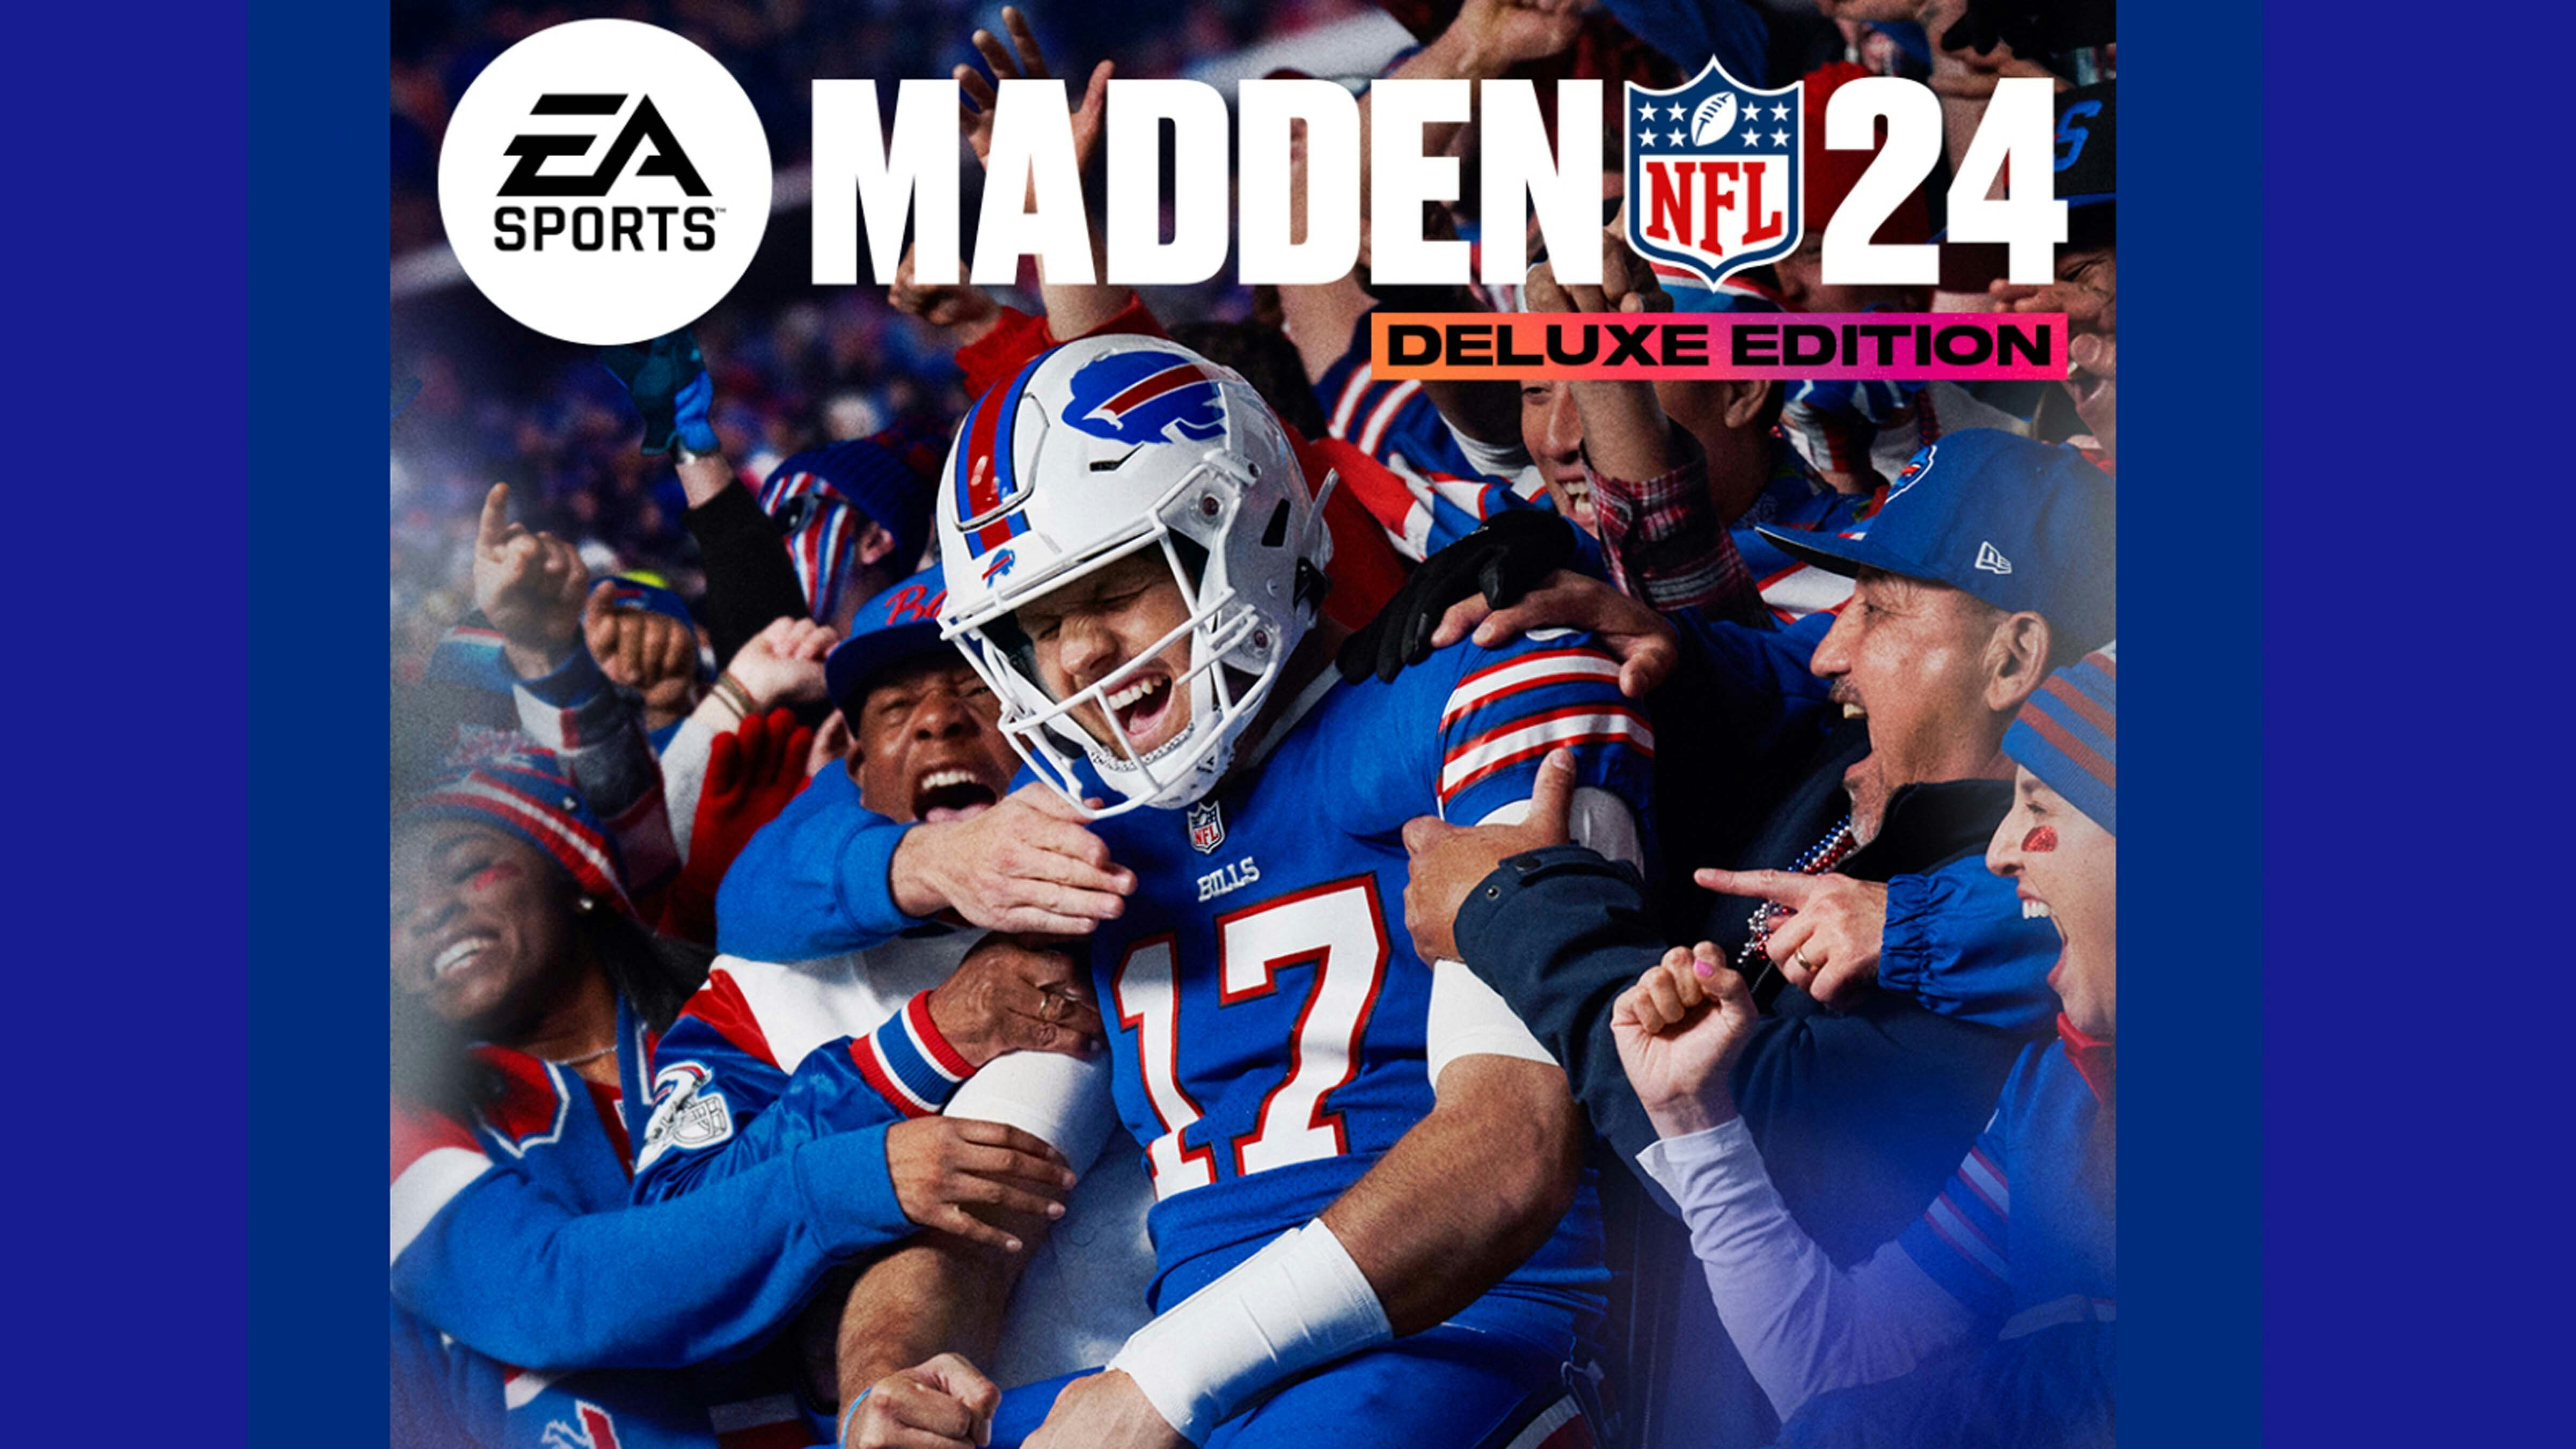 cover of madden 23